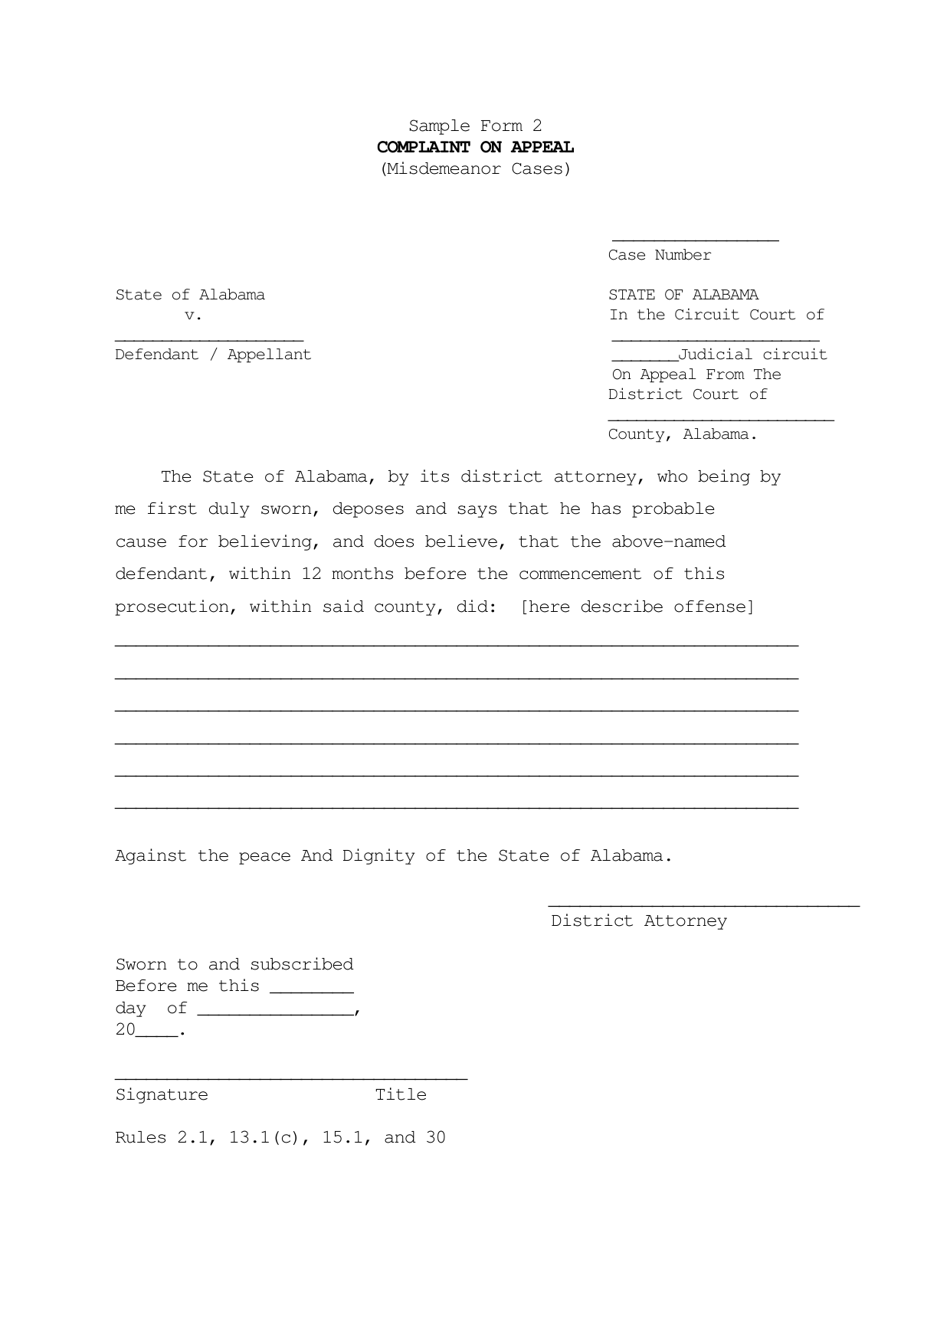 Sample Form 2 Complaint on Appeal (Misdemeanor Cases) - Alabama, Page 1